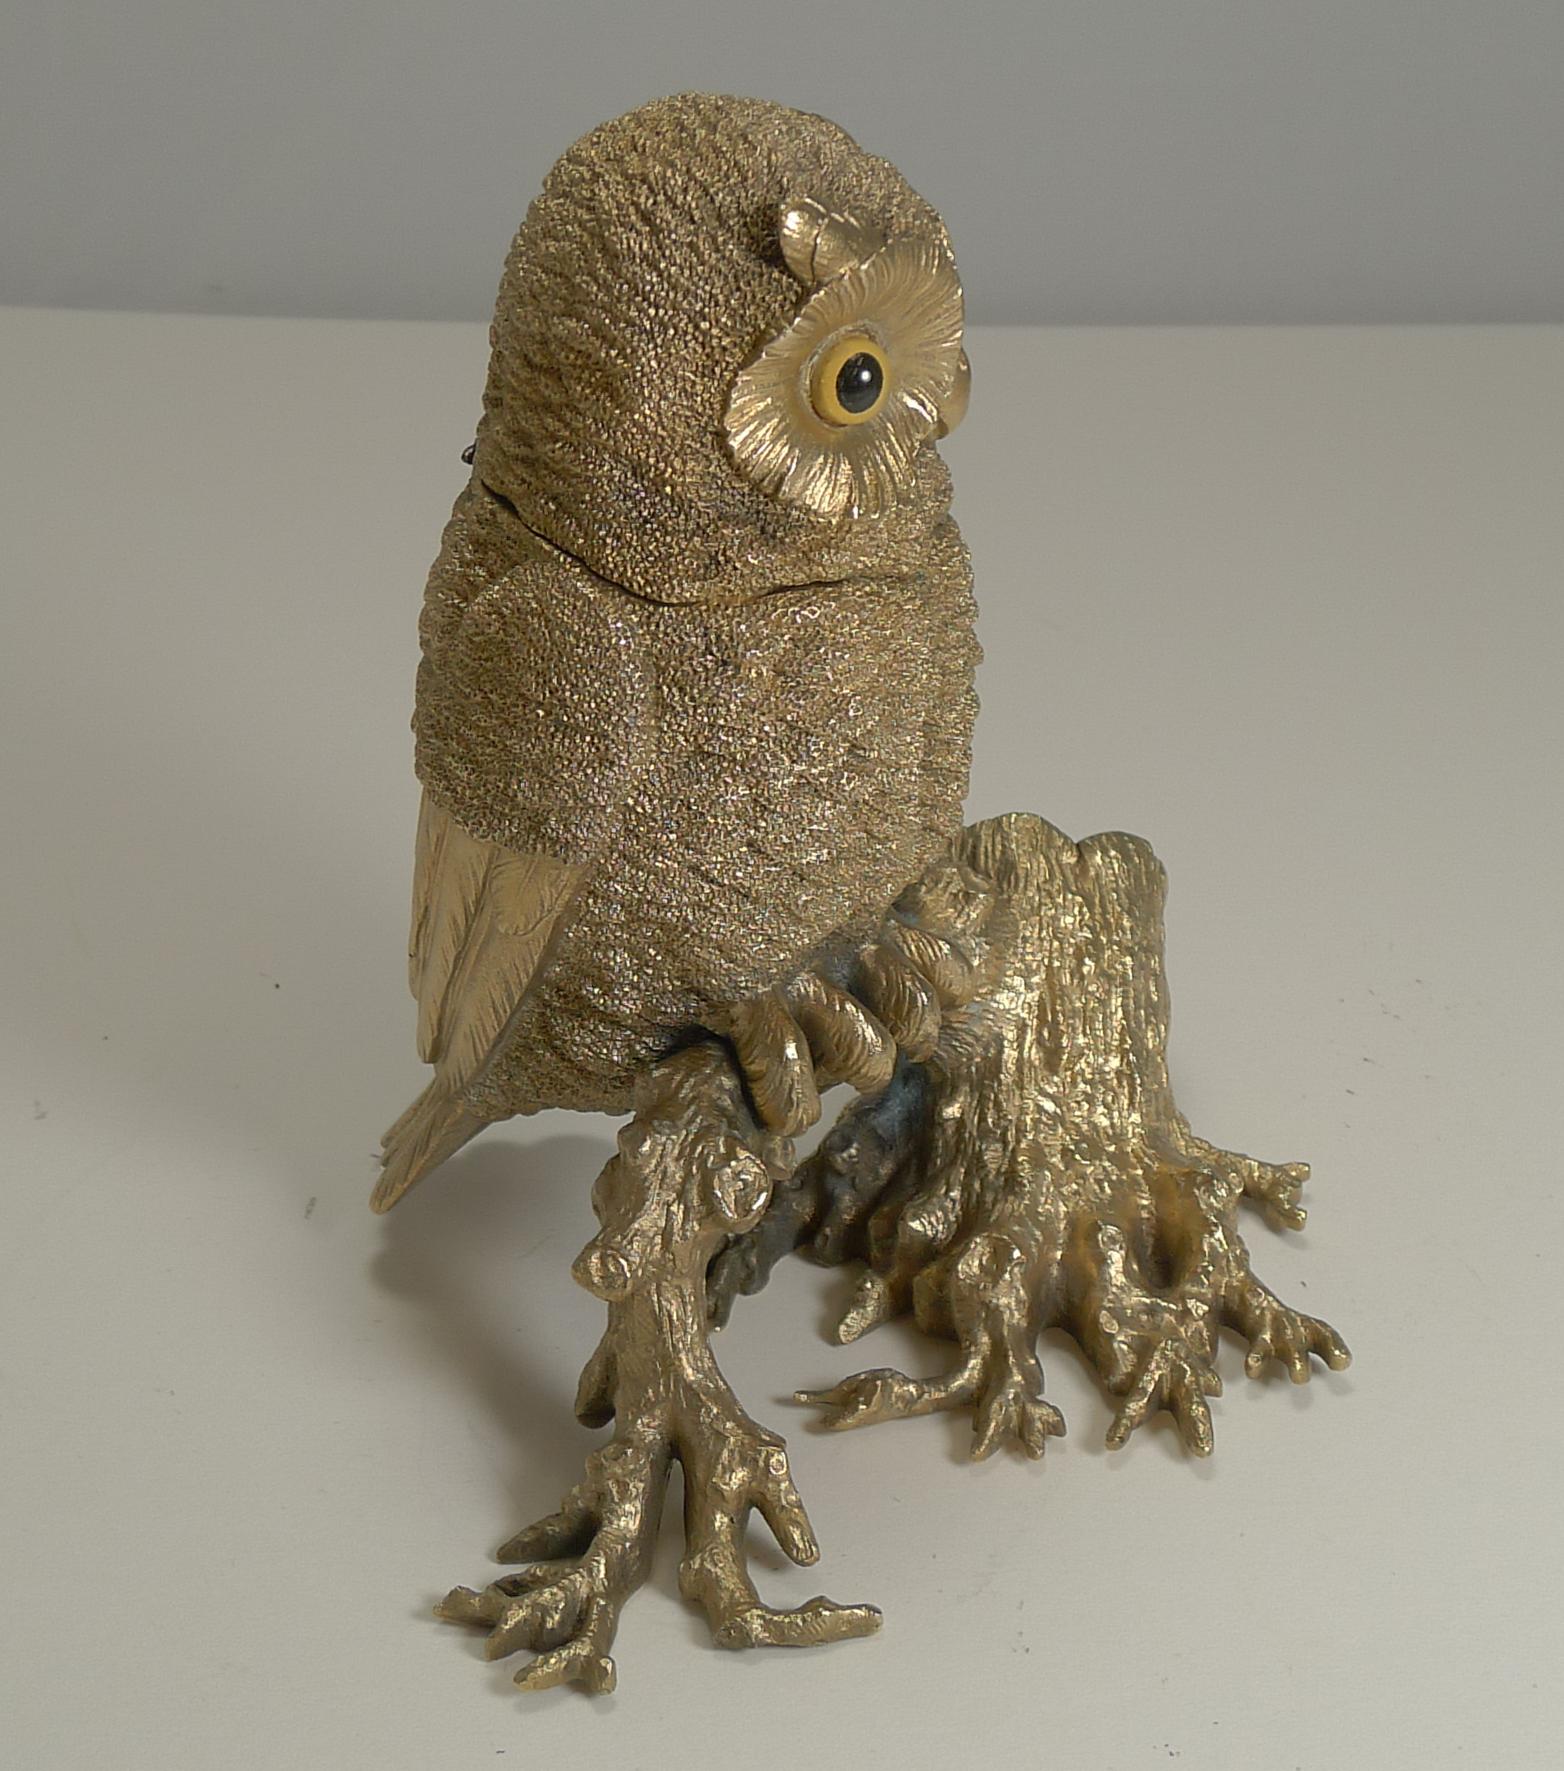 A top quality antique figural inkwell cast from bronze with exquisite detail and smothered in gold, professionally cleaned to create a show-stopping desk-top heirloom.

The owl with his two glass eyes sits on a tree branch leading to a hollowed